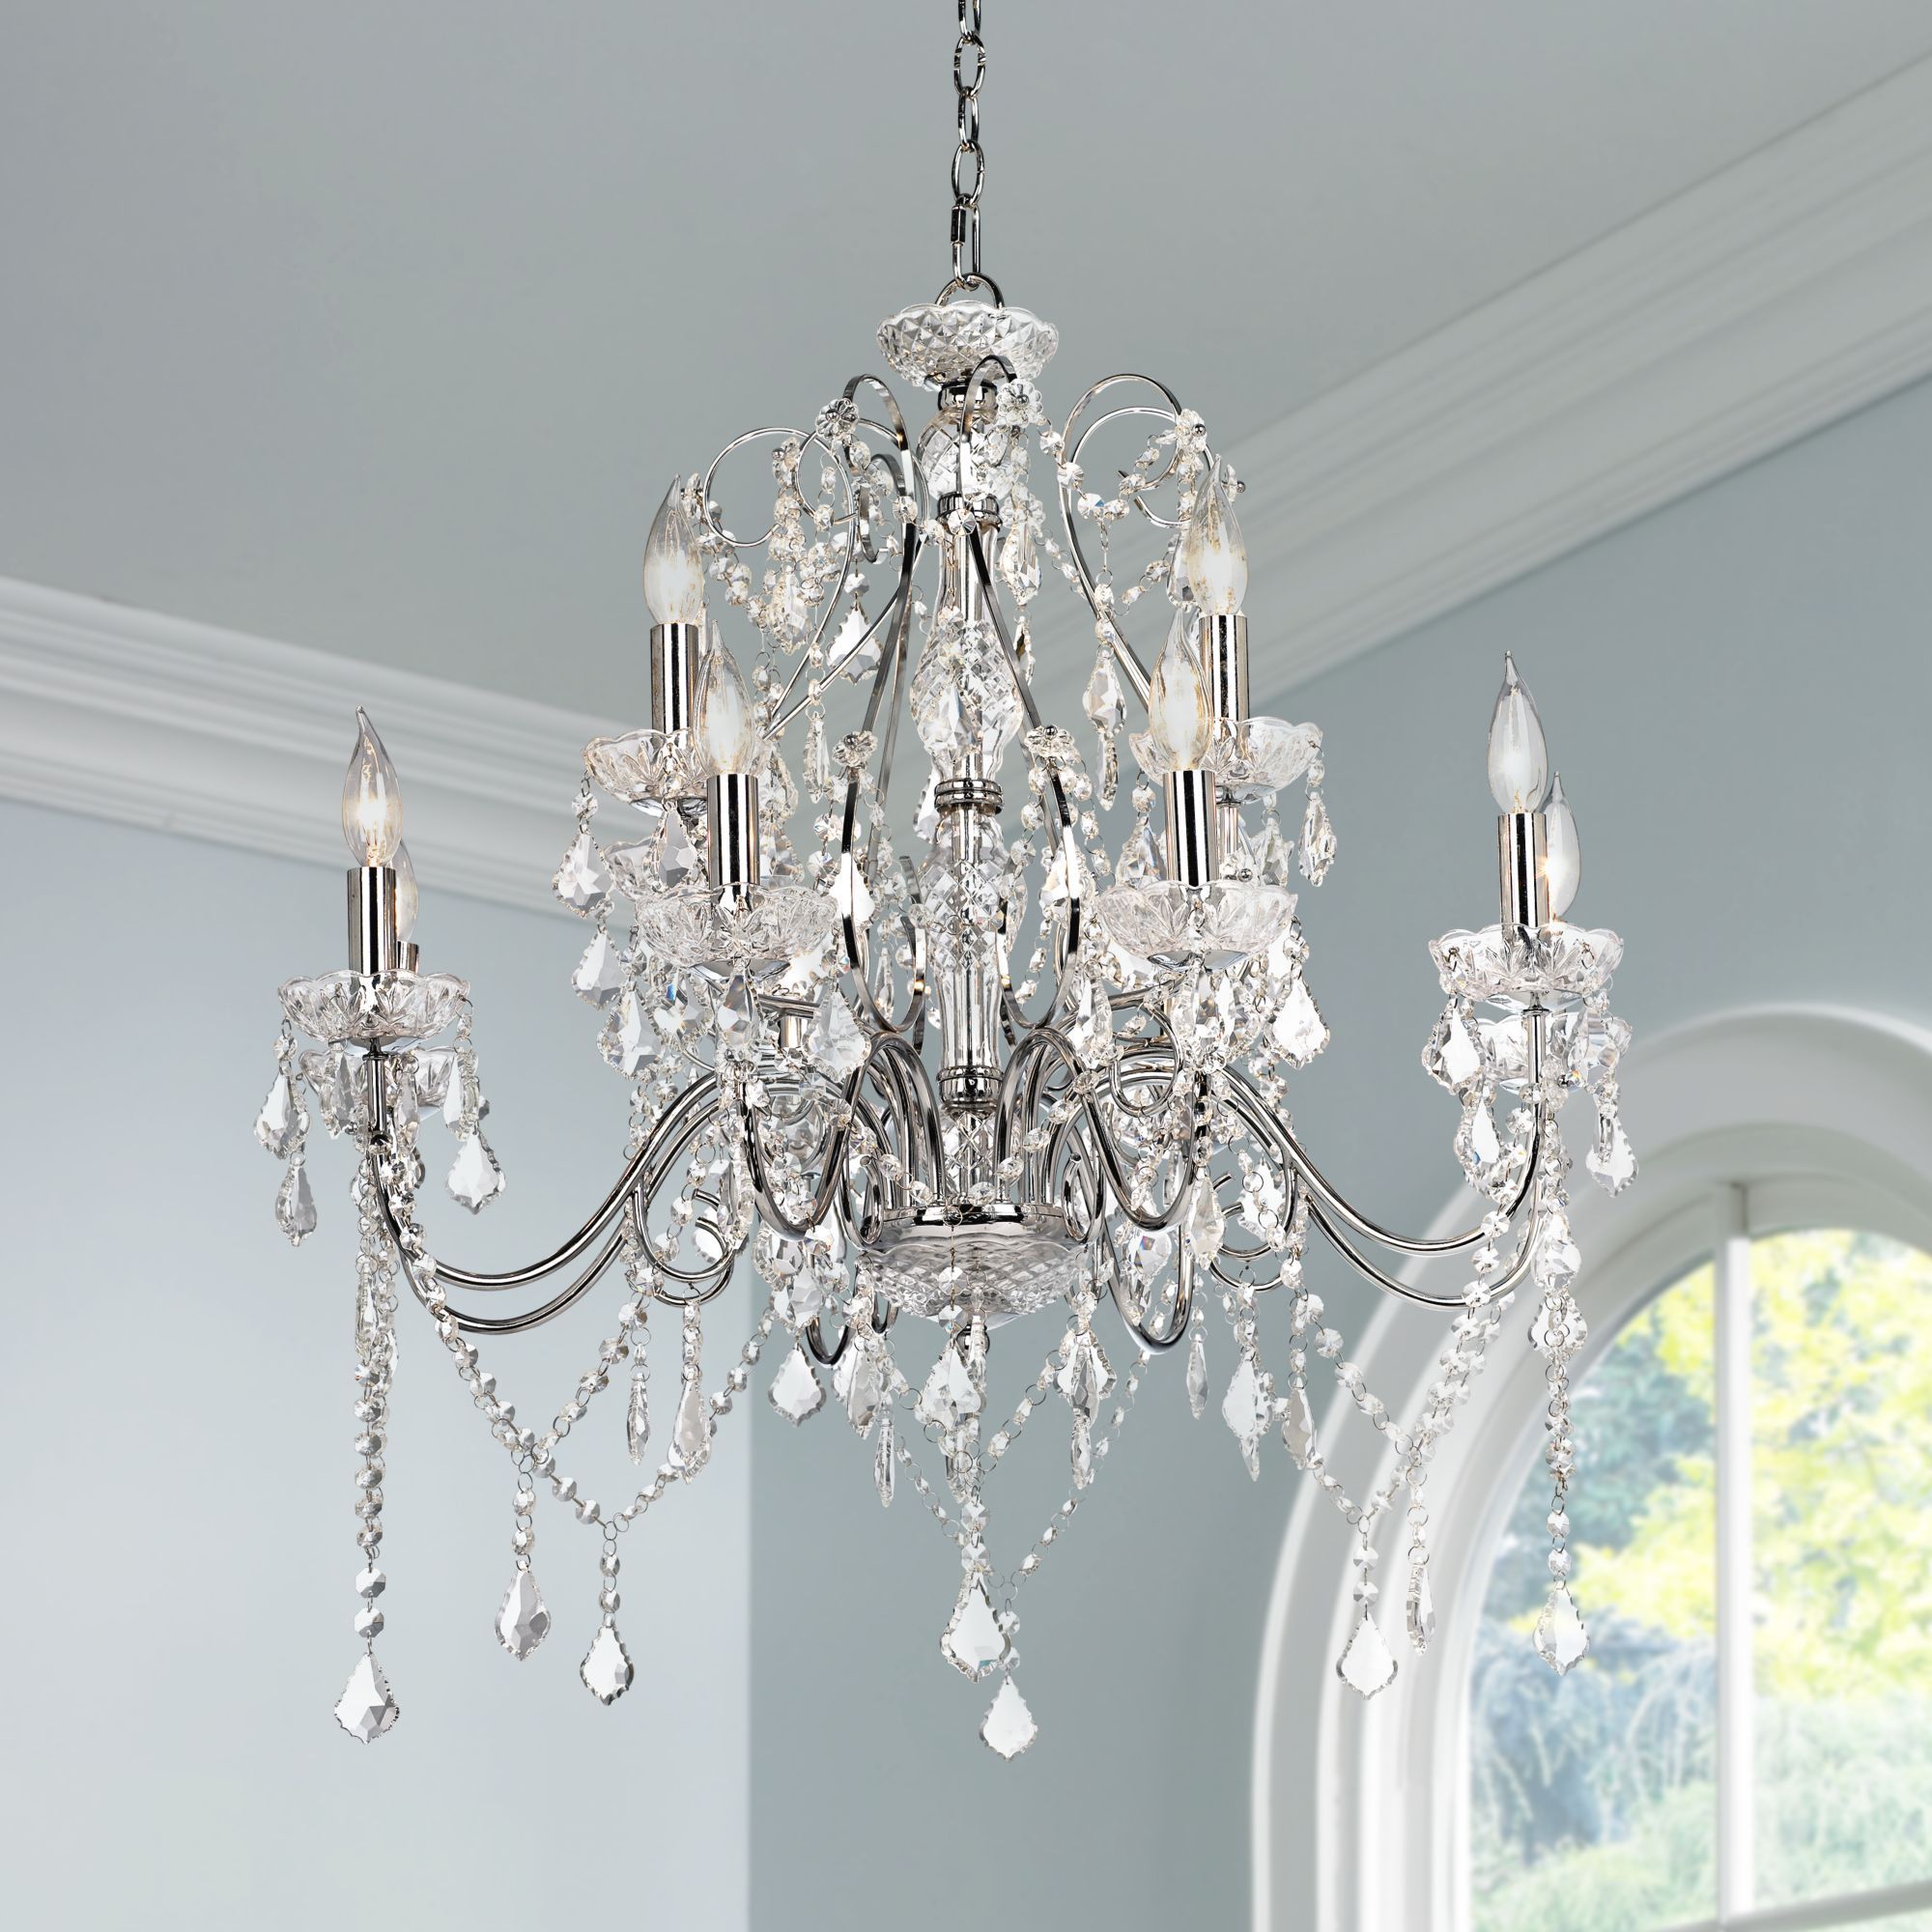 Vienna Full Spectrum Chrome Chandelier 30" Wide Crystal 12 For Chrome And Crystal Led Chandeliers (View 2 of 15)